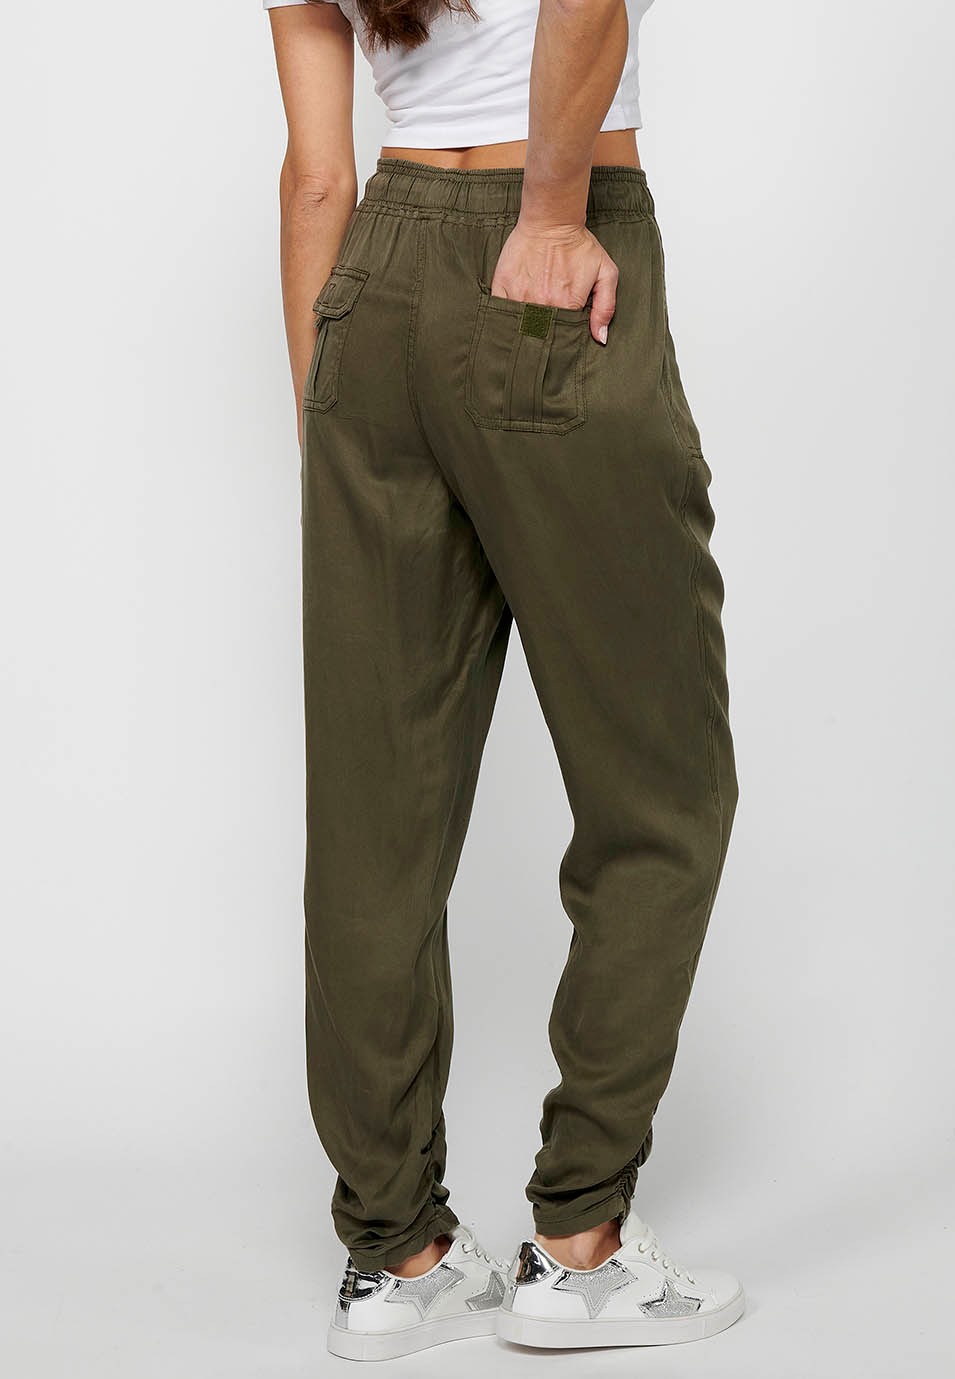 Long jogger pants with curled finish and rubberized waist with four pockets, two rear pockets with flap in Khaki color for women 5